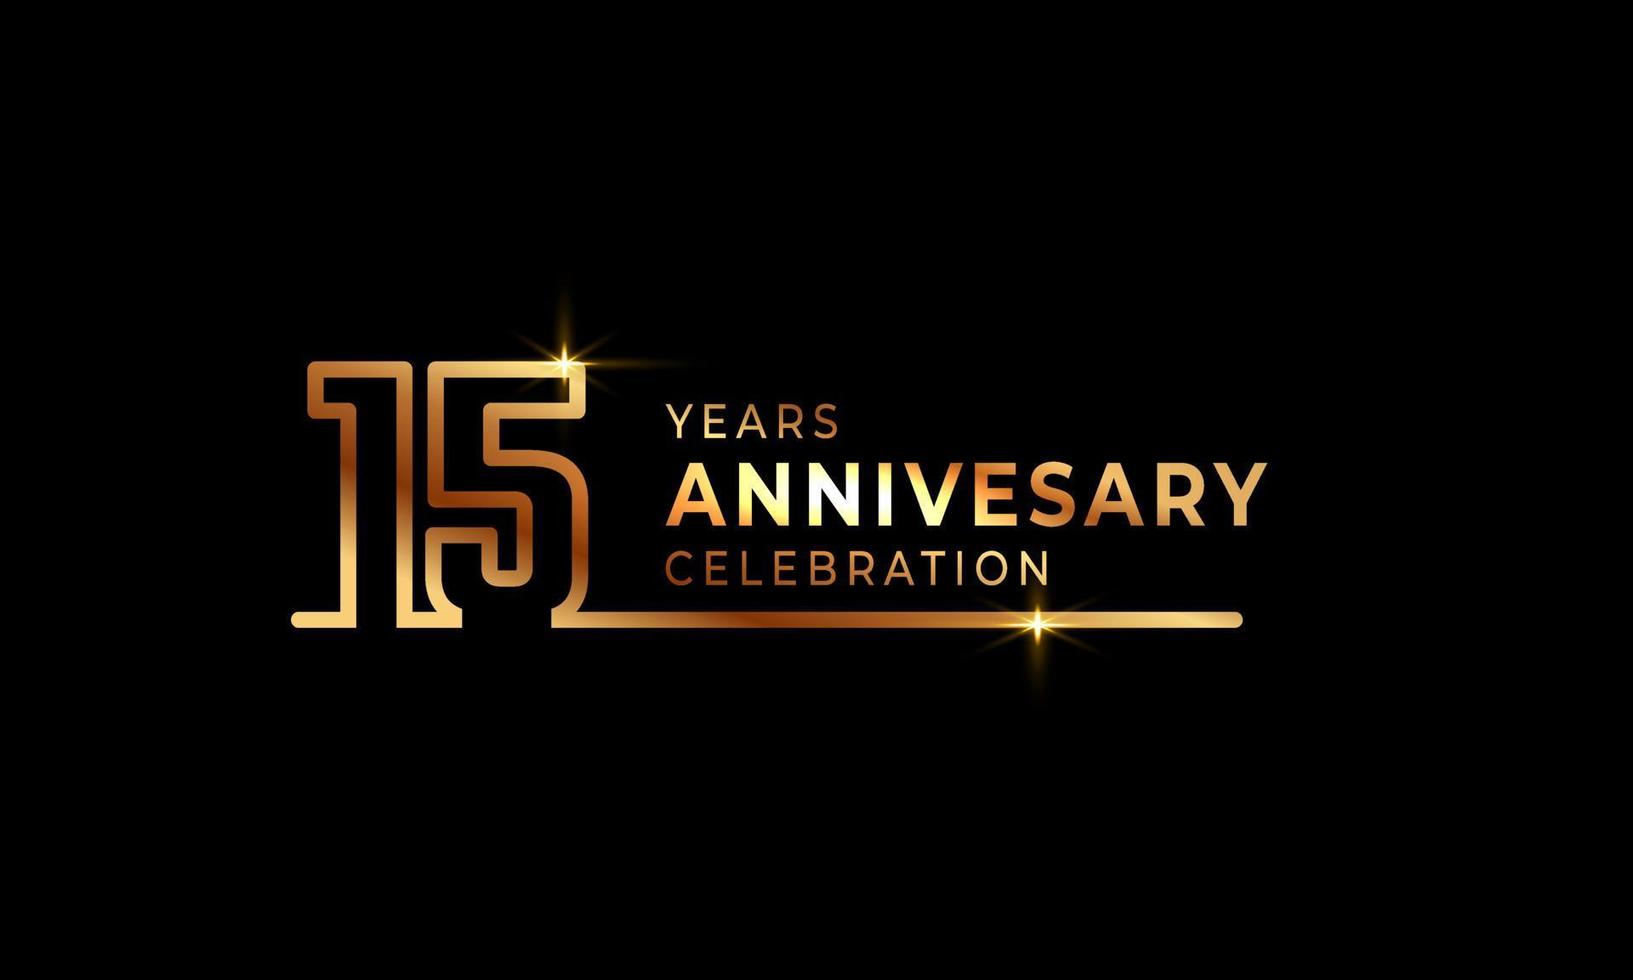 15 Year Anniversary Celebration Logotype with Golden Colored Font Numbers Made of One Connected Line for Celebration Event, Wedding, Greeting card, and Invitation Isolated on Dark Background vector